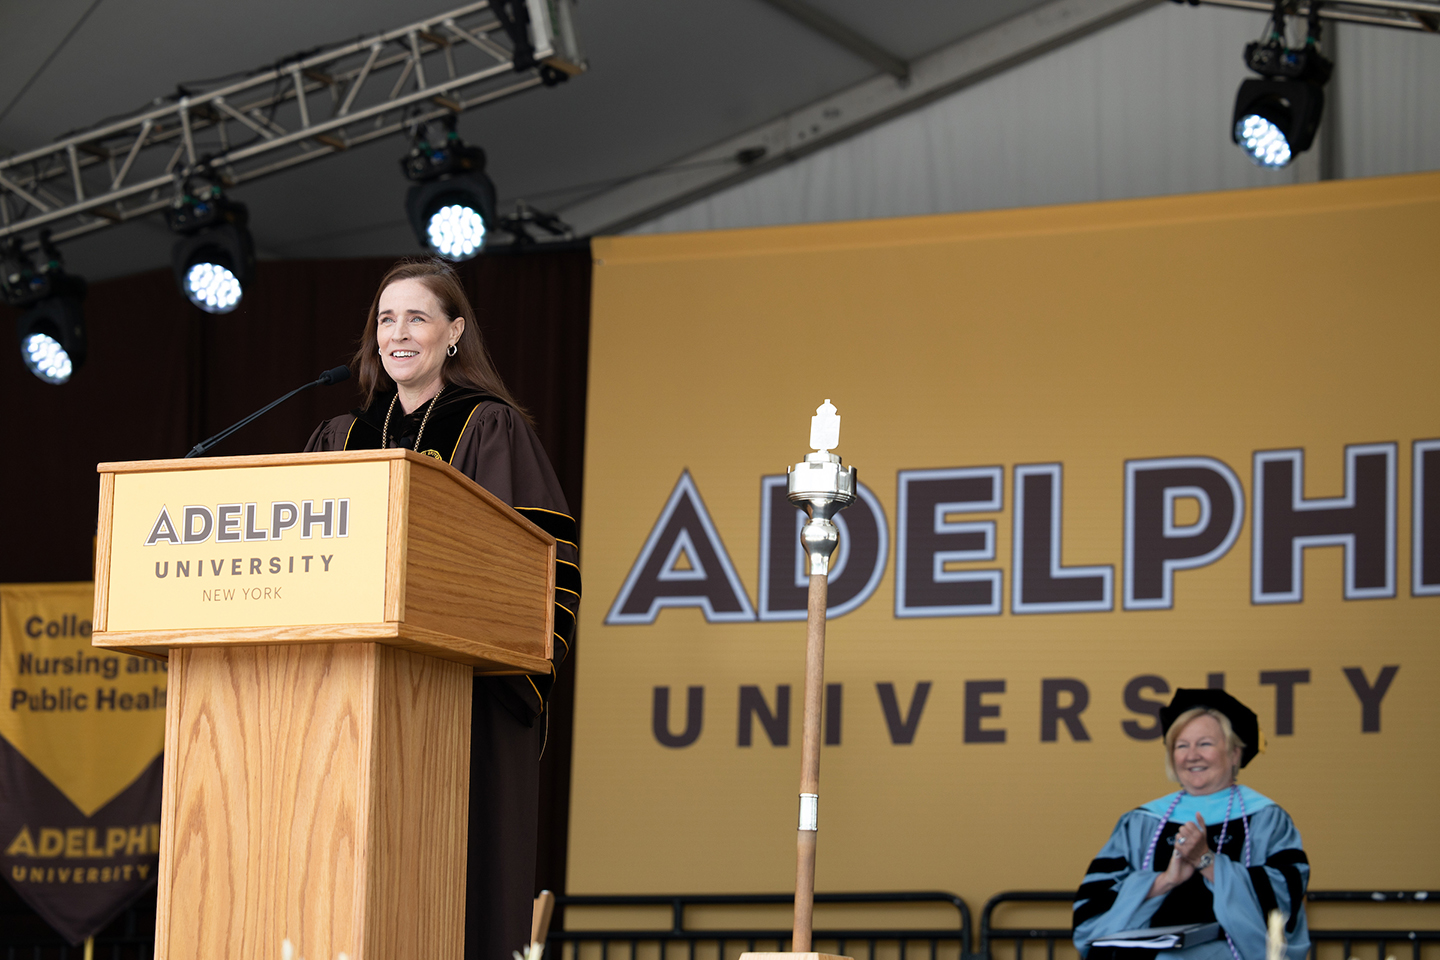 President Riordan standing behind a podium in a commencement robe, an Adelphi banner behind her.